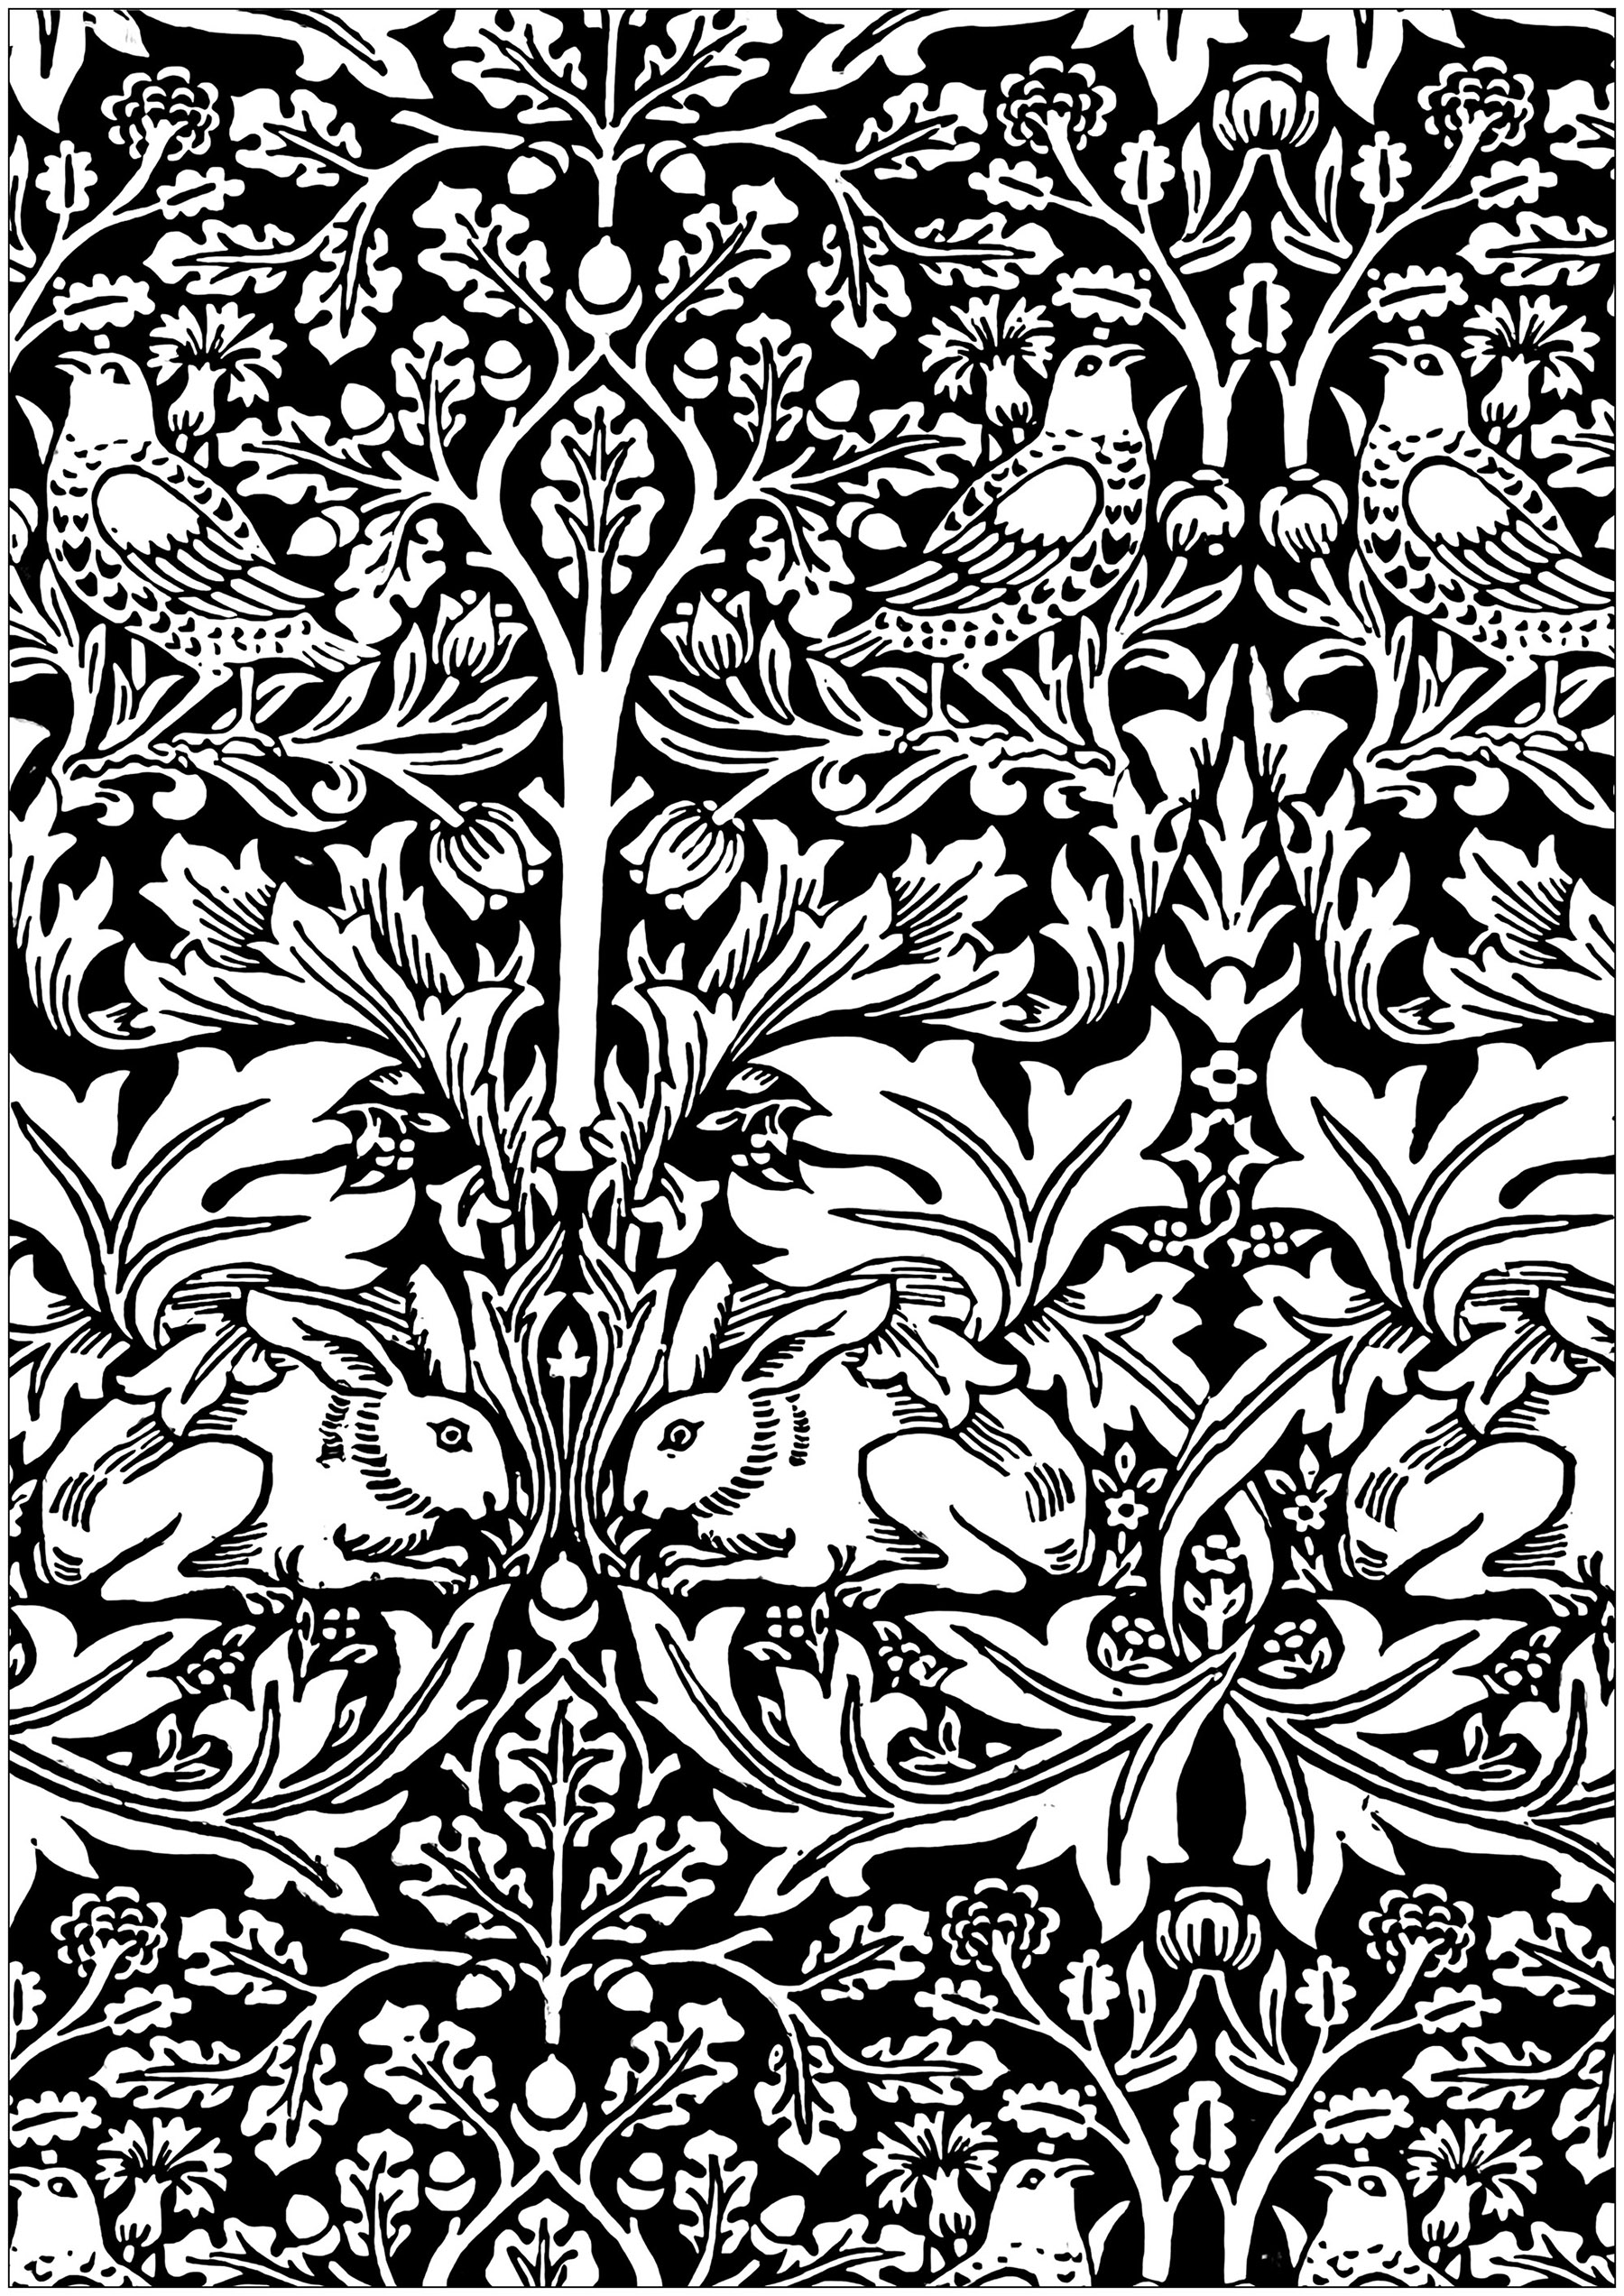 Coloring page created from a printed cotton board by William Morris : 'Brother rabbit' (1882). The title is inspired by a traditional African-American tale 'Brer Rabbit', which was adapted and published by Joel Chandler Harris in 1881.Morris' use of the paired animals and birds among fantastic foliage in this design clearly illustrates his interest in medieval European textiles.